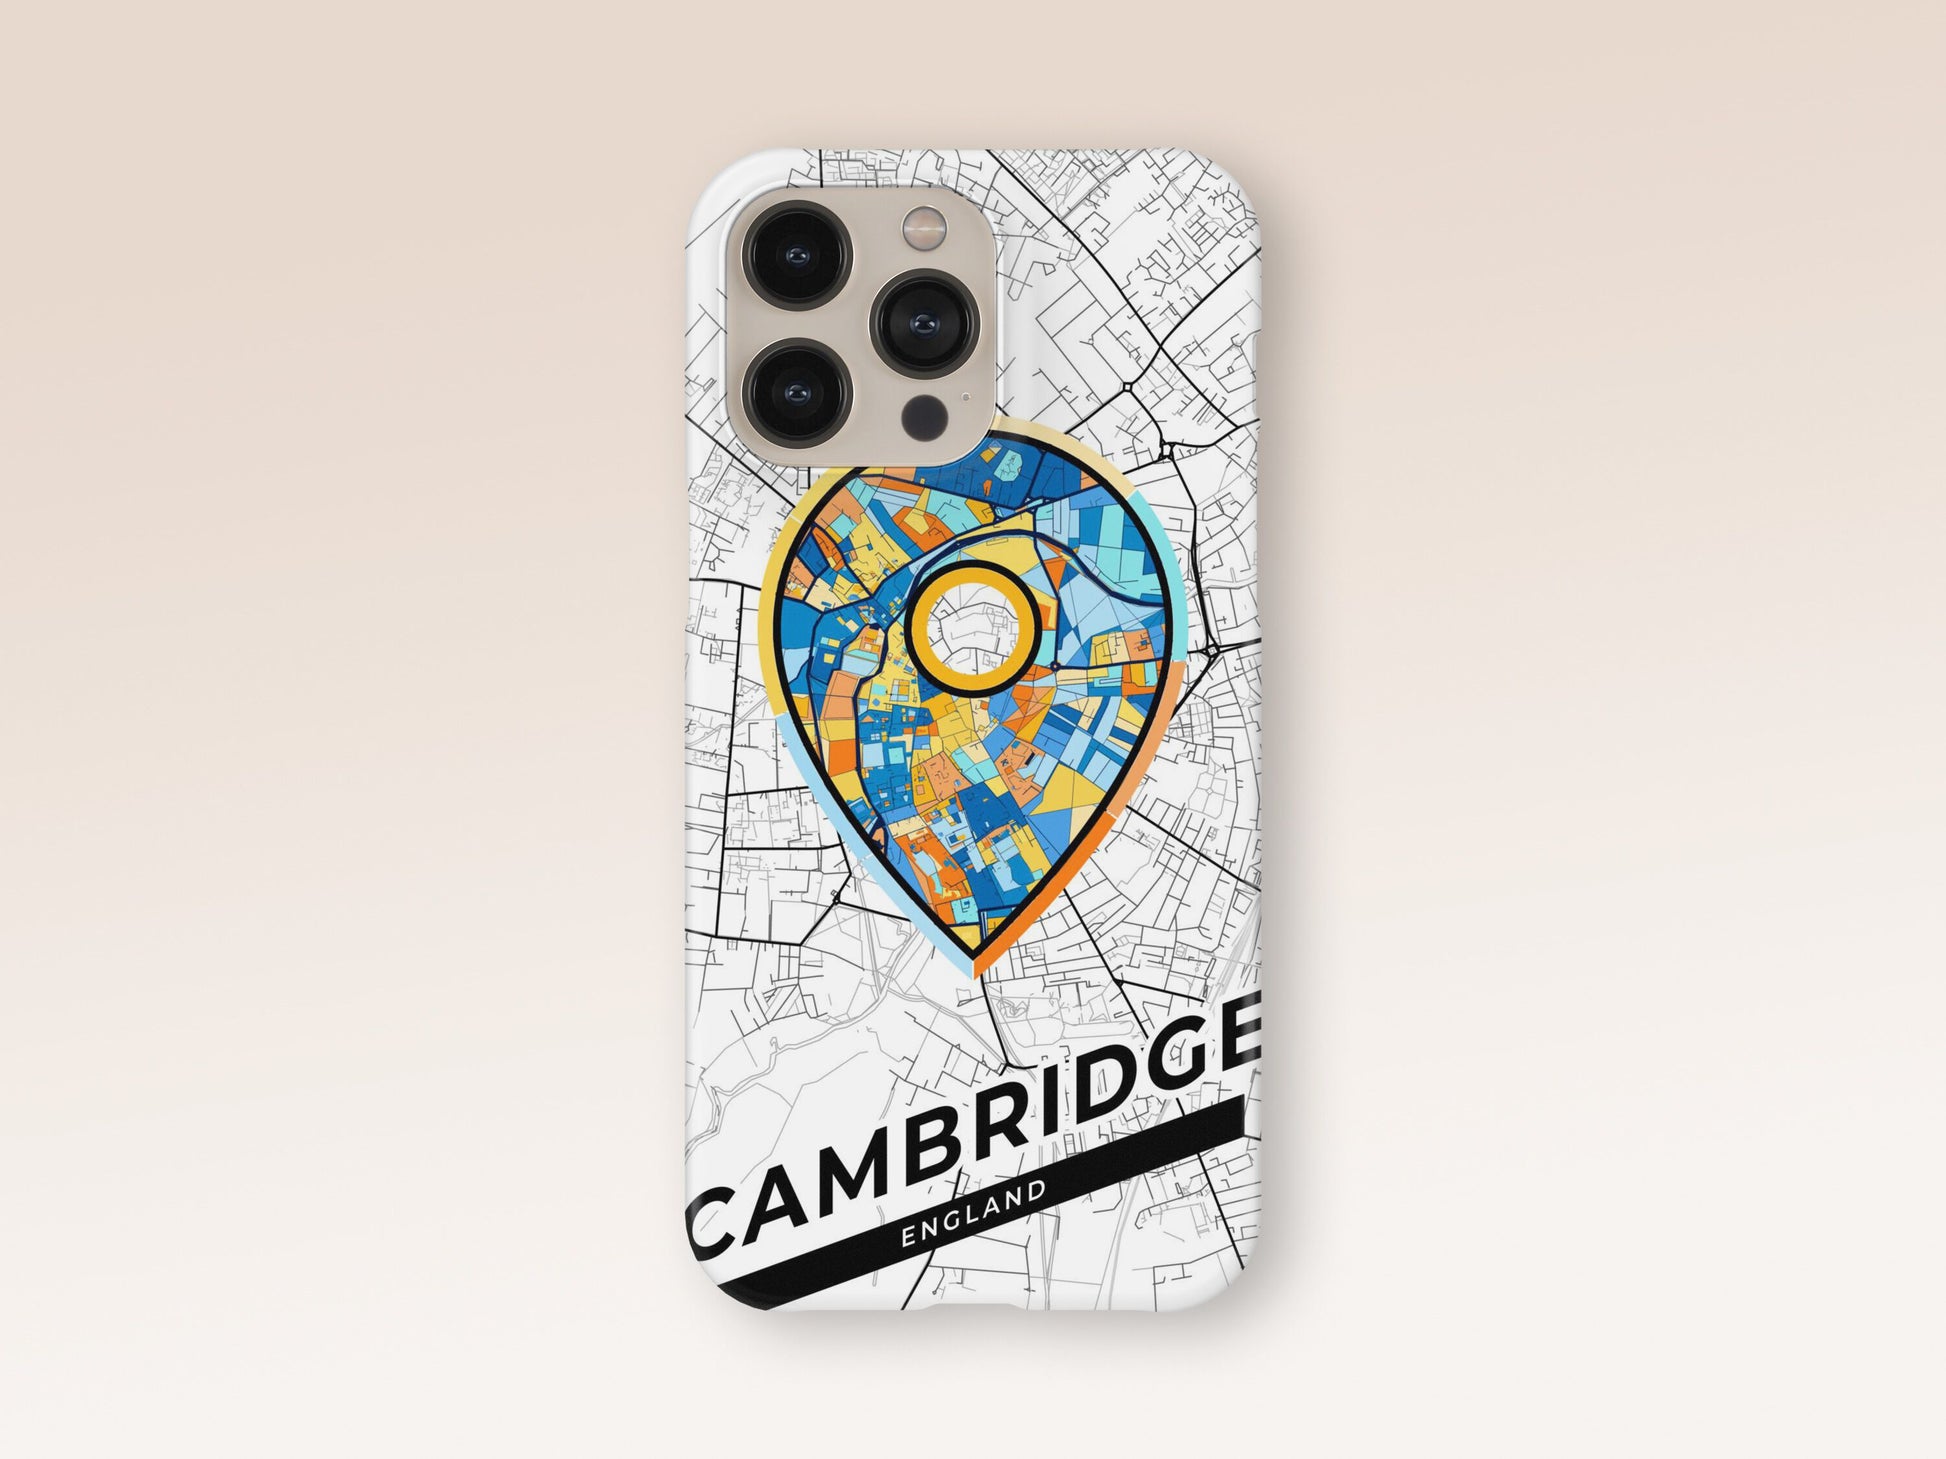 Cambridge England slim phone case with colorful icon. Birthday, wedding or housewarming gift. Couple match cases. 1